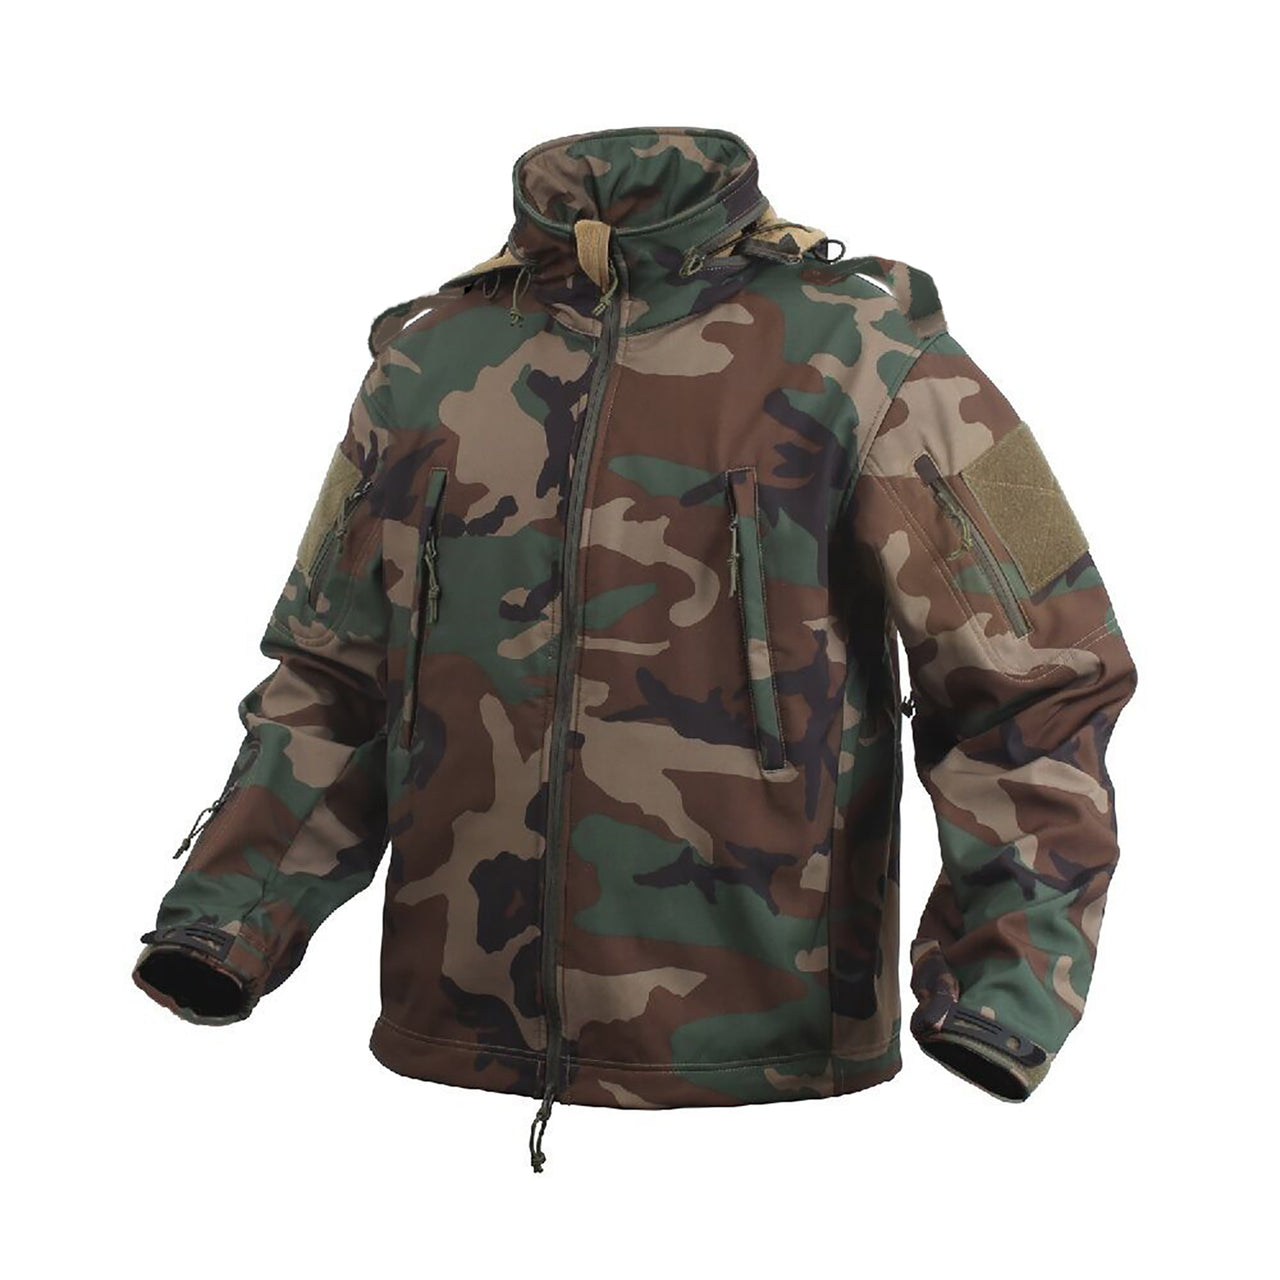 Tactical Softshell Jacket with Shoulder Flaps - Woodland Camo